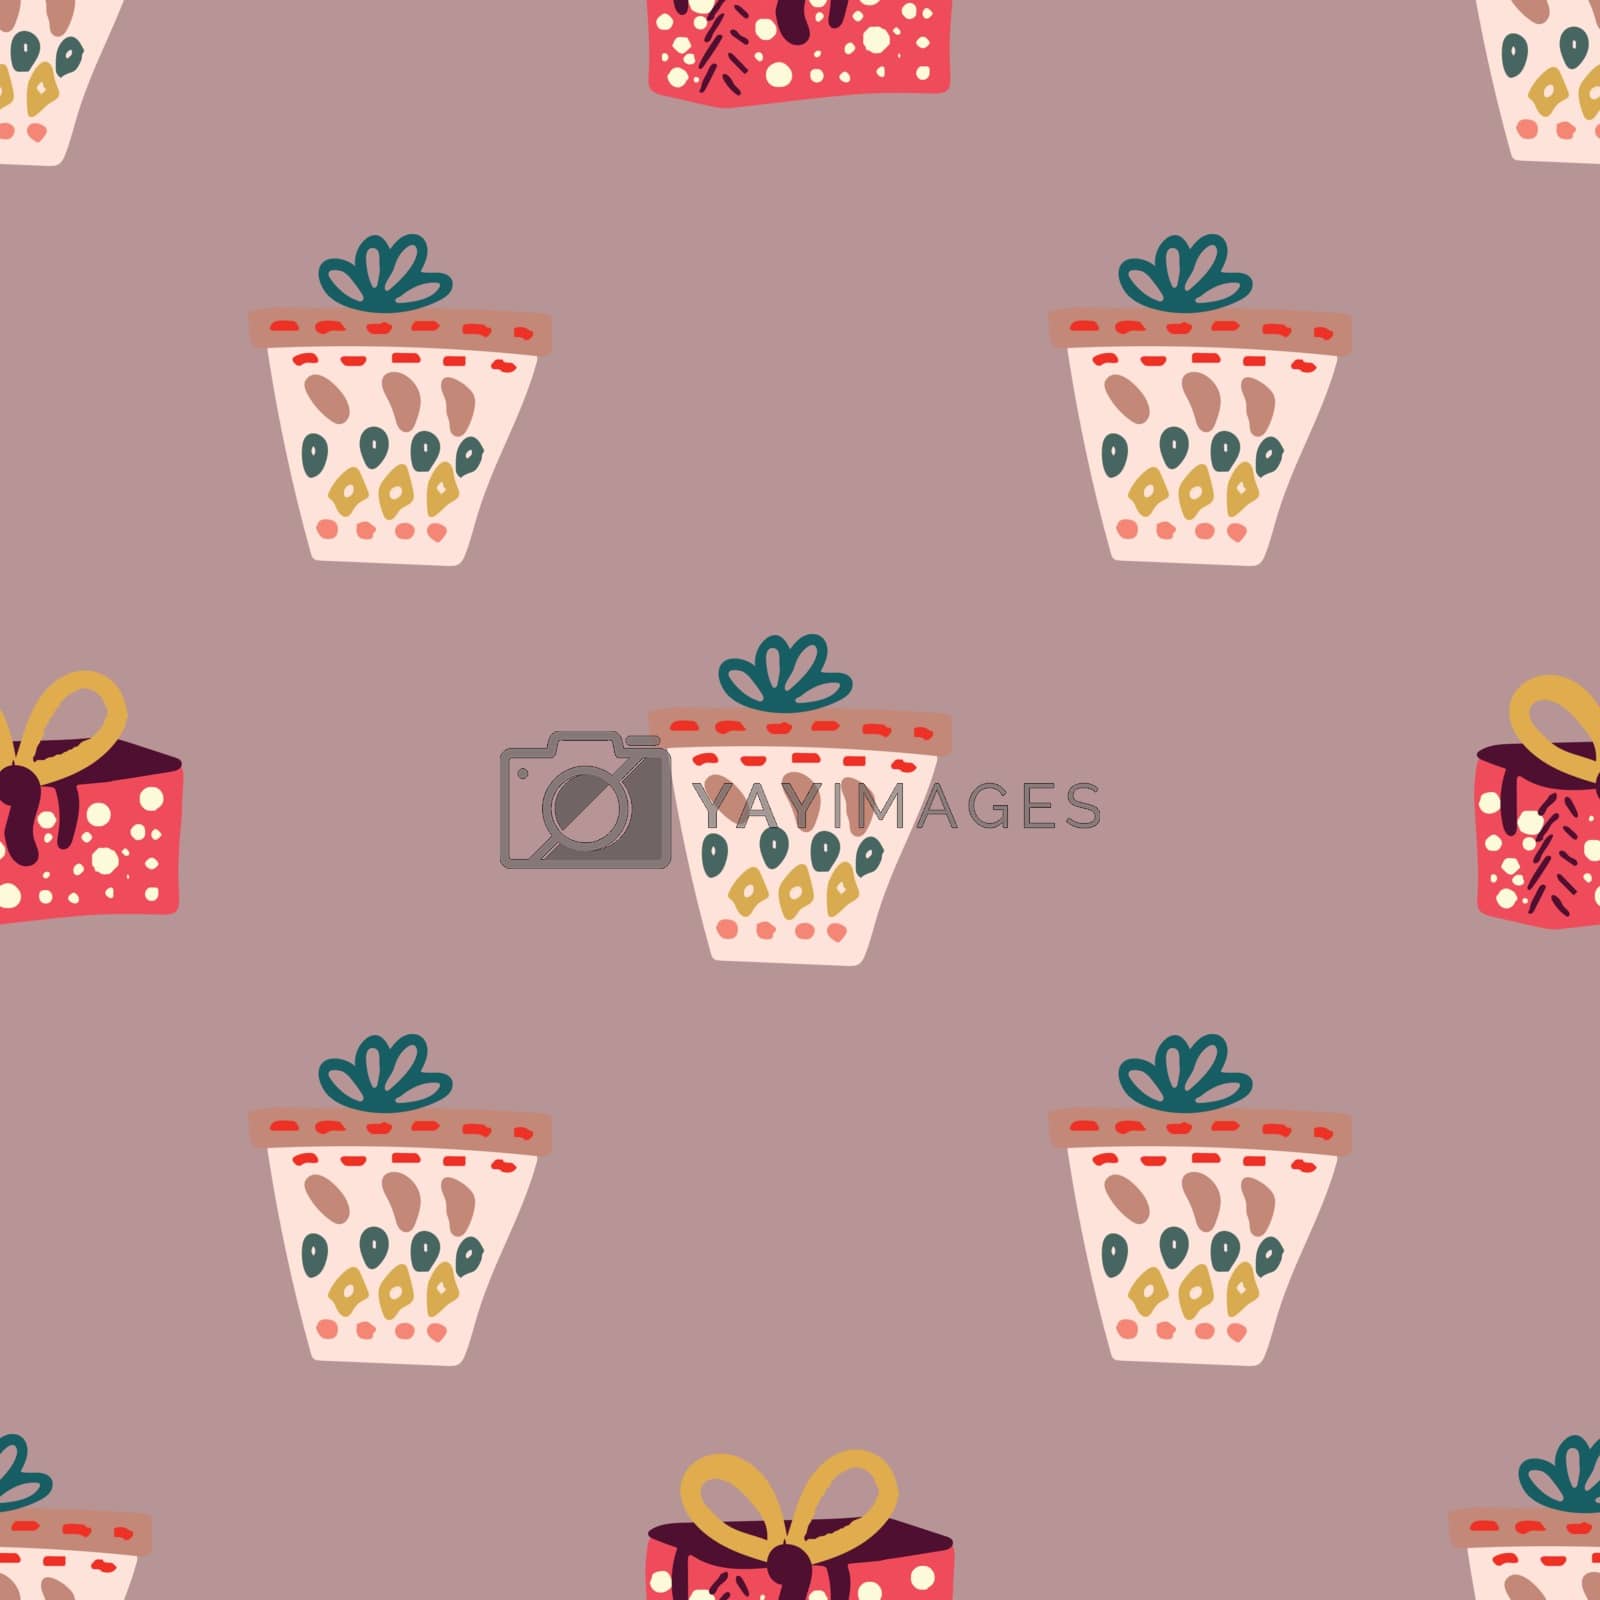 Royalty free image of Giant Christmas gifts seamless pattern on dusty pink background by Nata_Prando